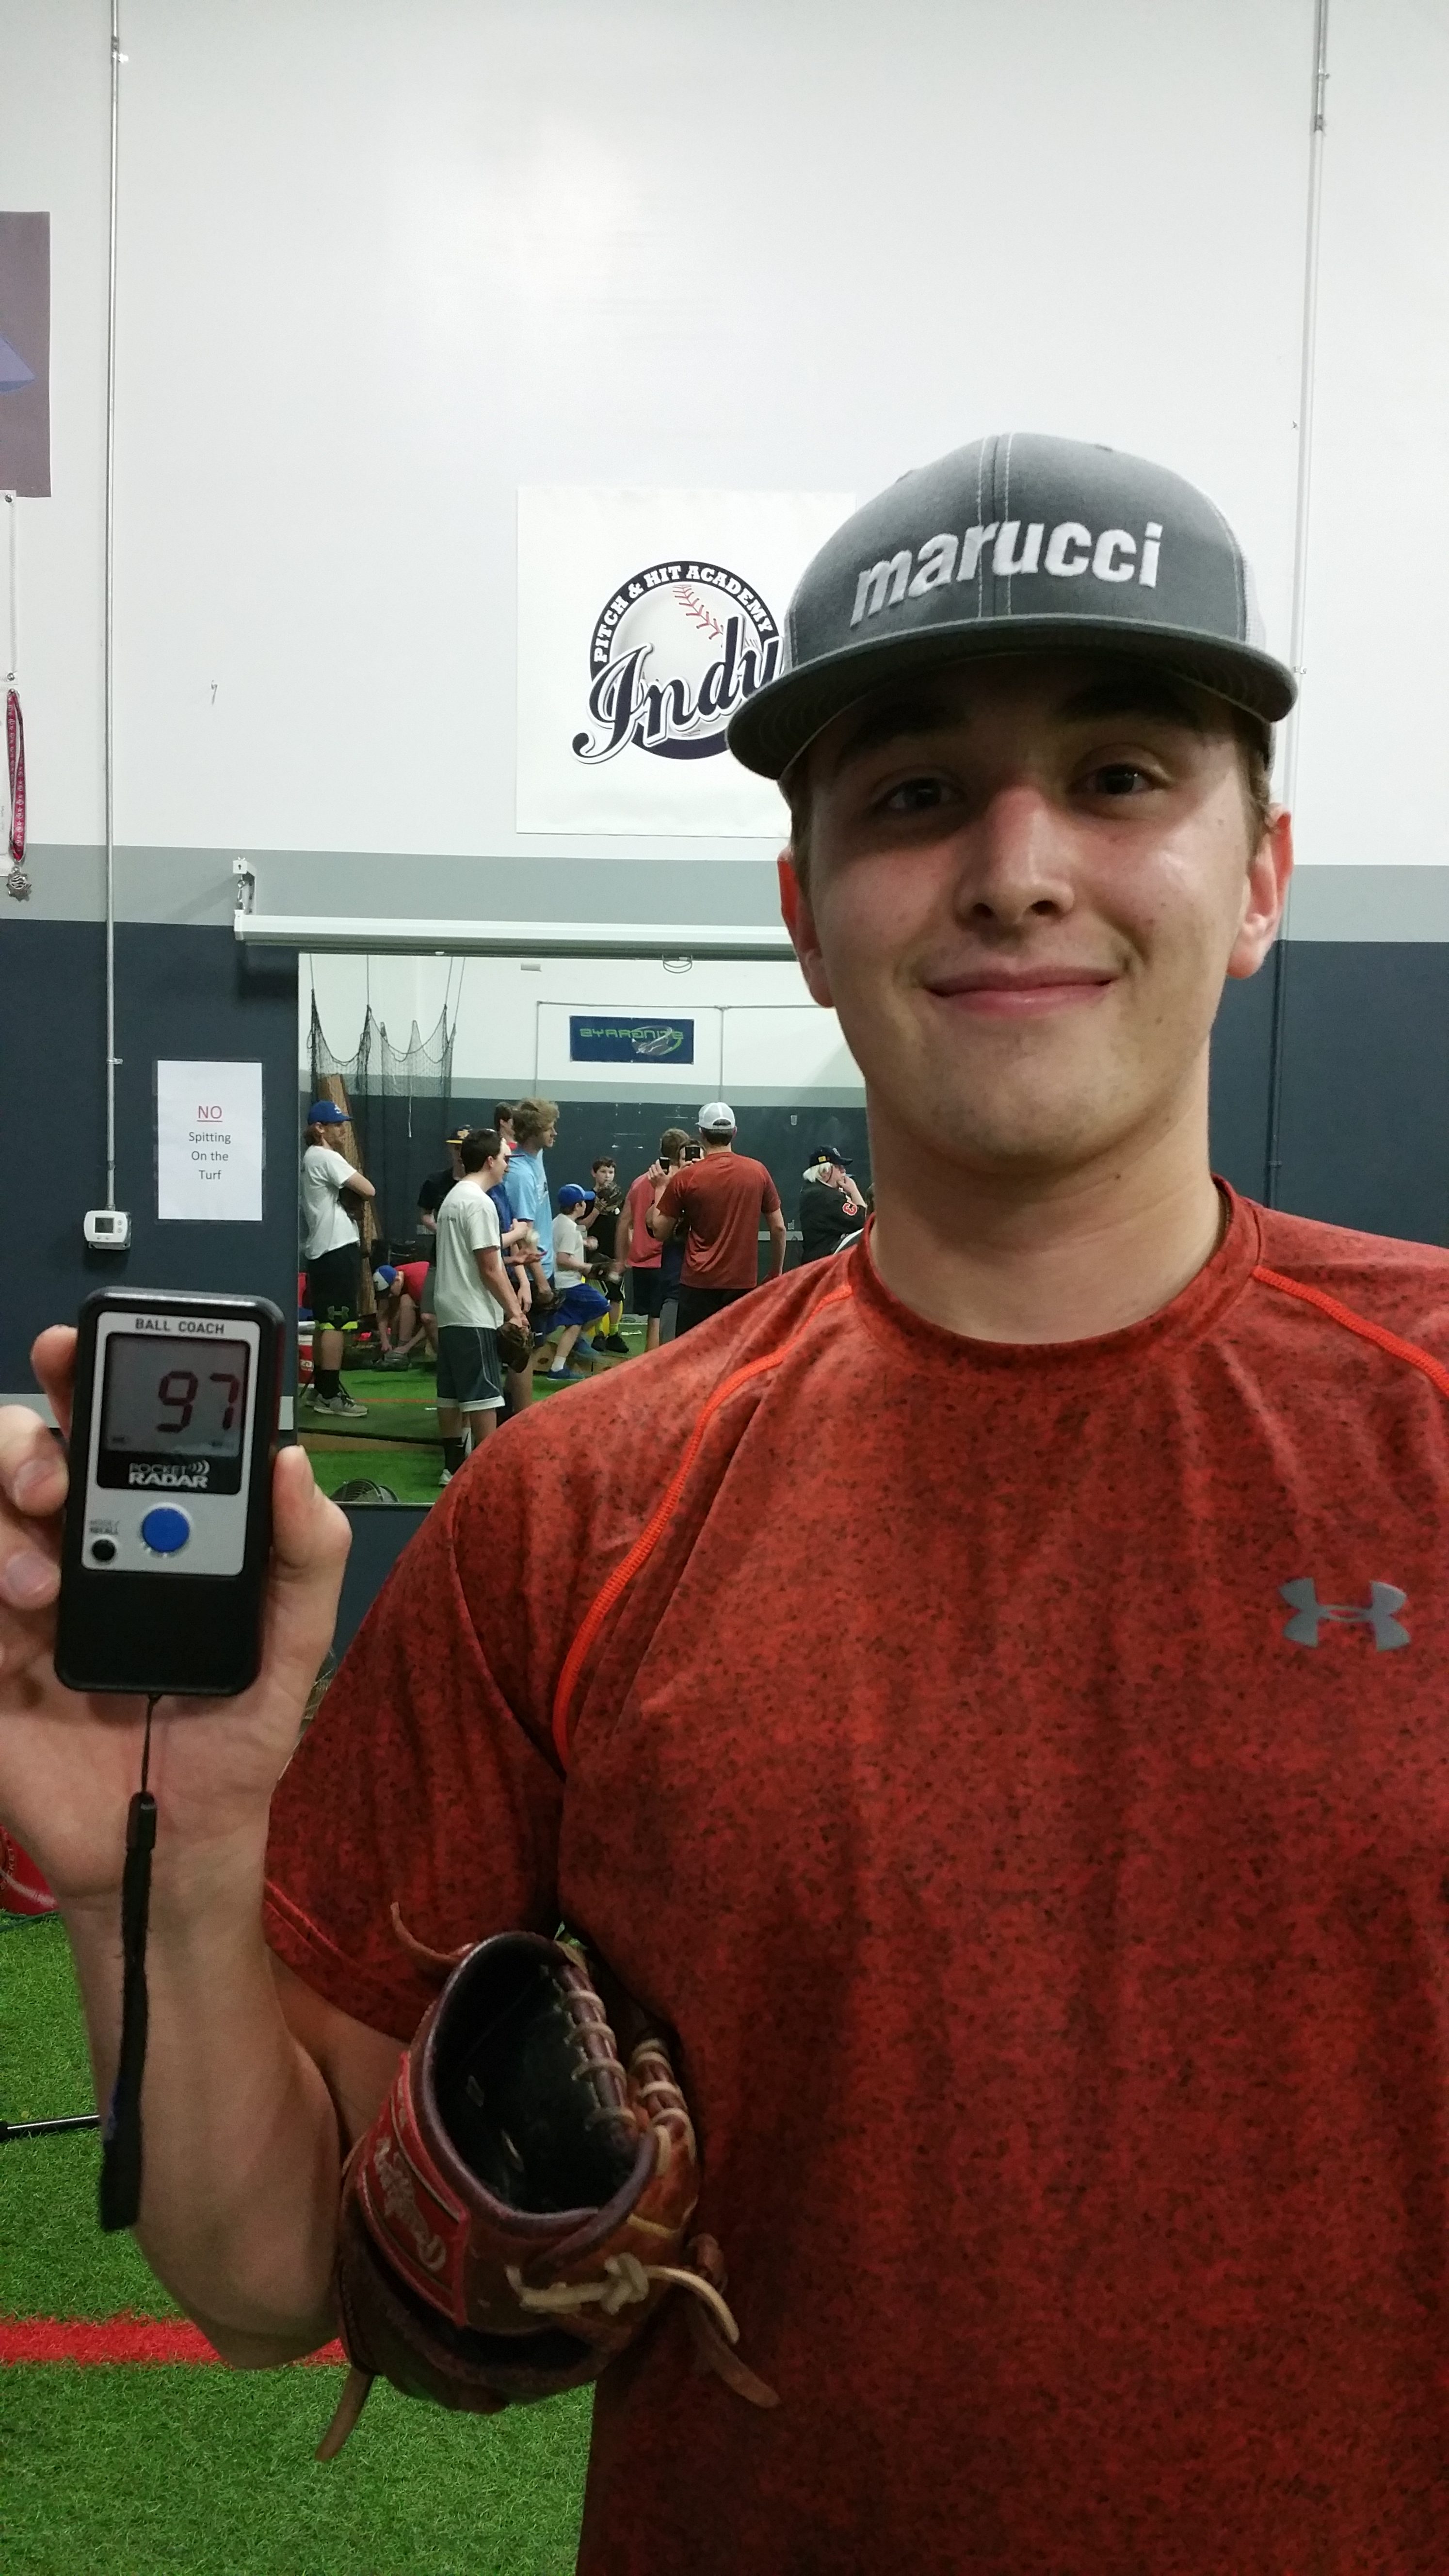 Jason Taulman coached athlete pitches a 97MPH fastball